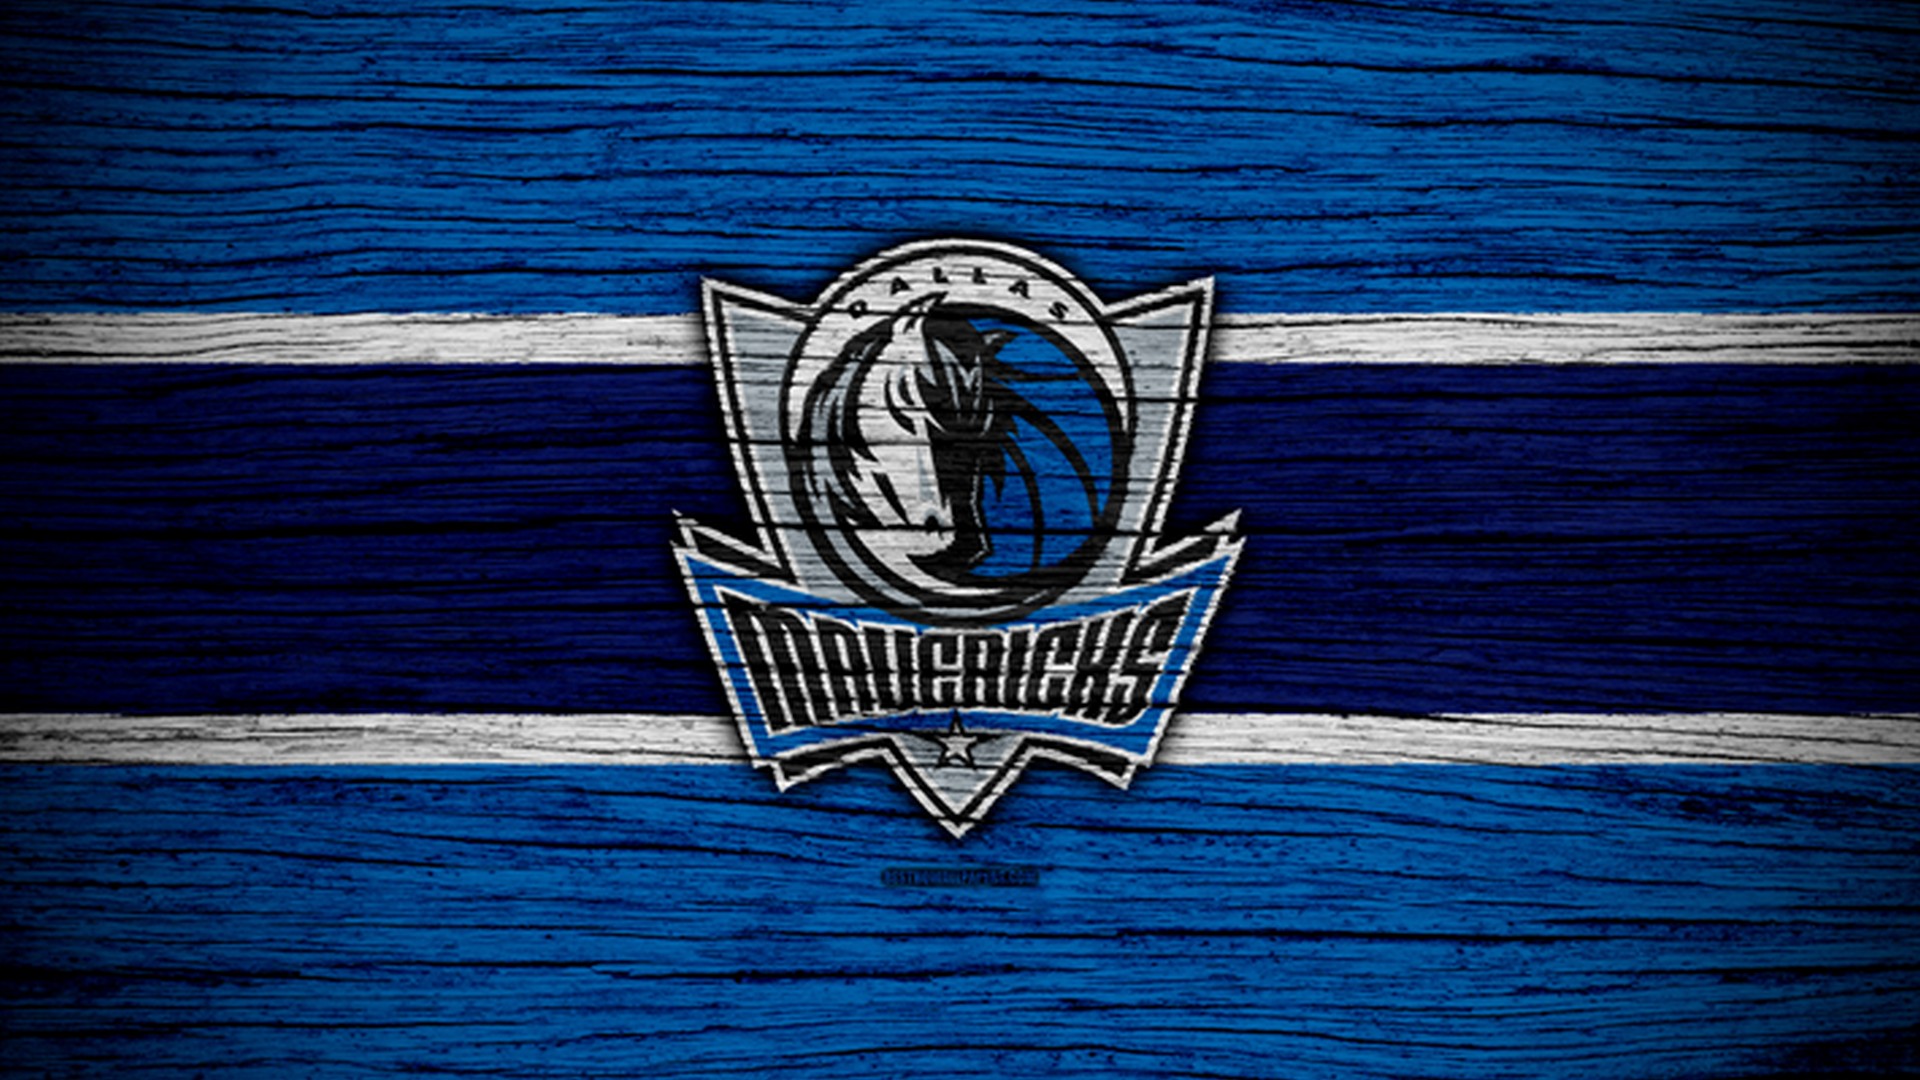 Dallas Mavericks For Desktop Wallpaper with high-resolution 1920x1080 pixel. You can use this wallpaper for your Desktop Computer Backgrounds, Windows or Mac Screensavers, iPhone Lock screen, Tablet or Android and another Mobile Phone device